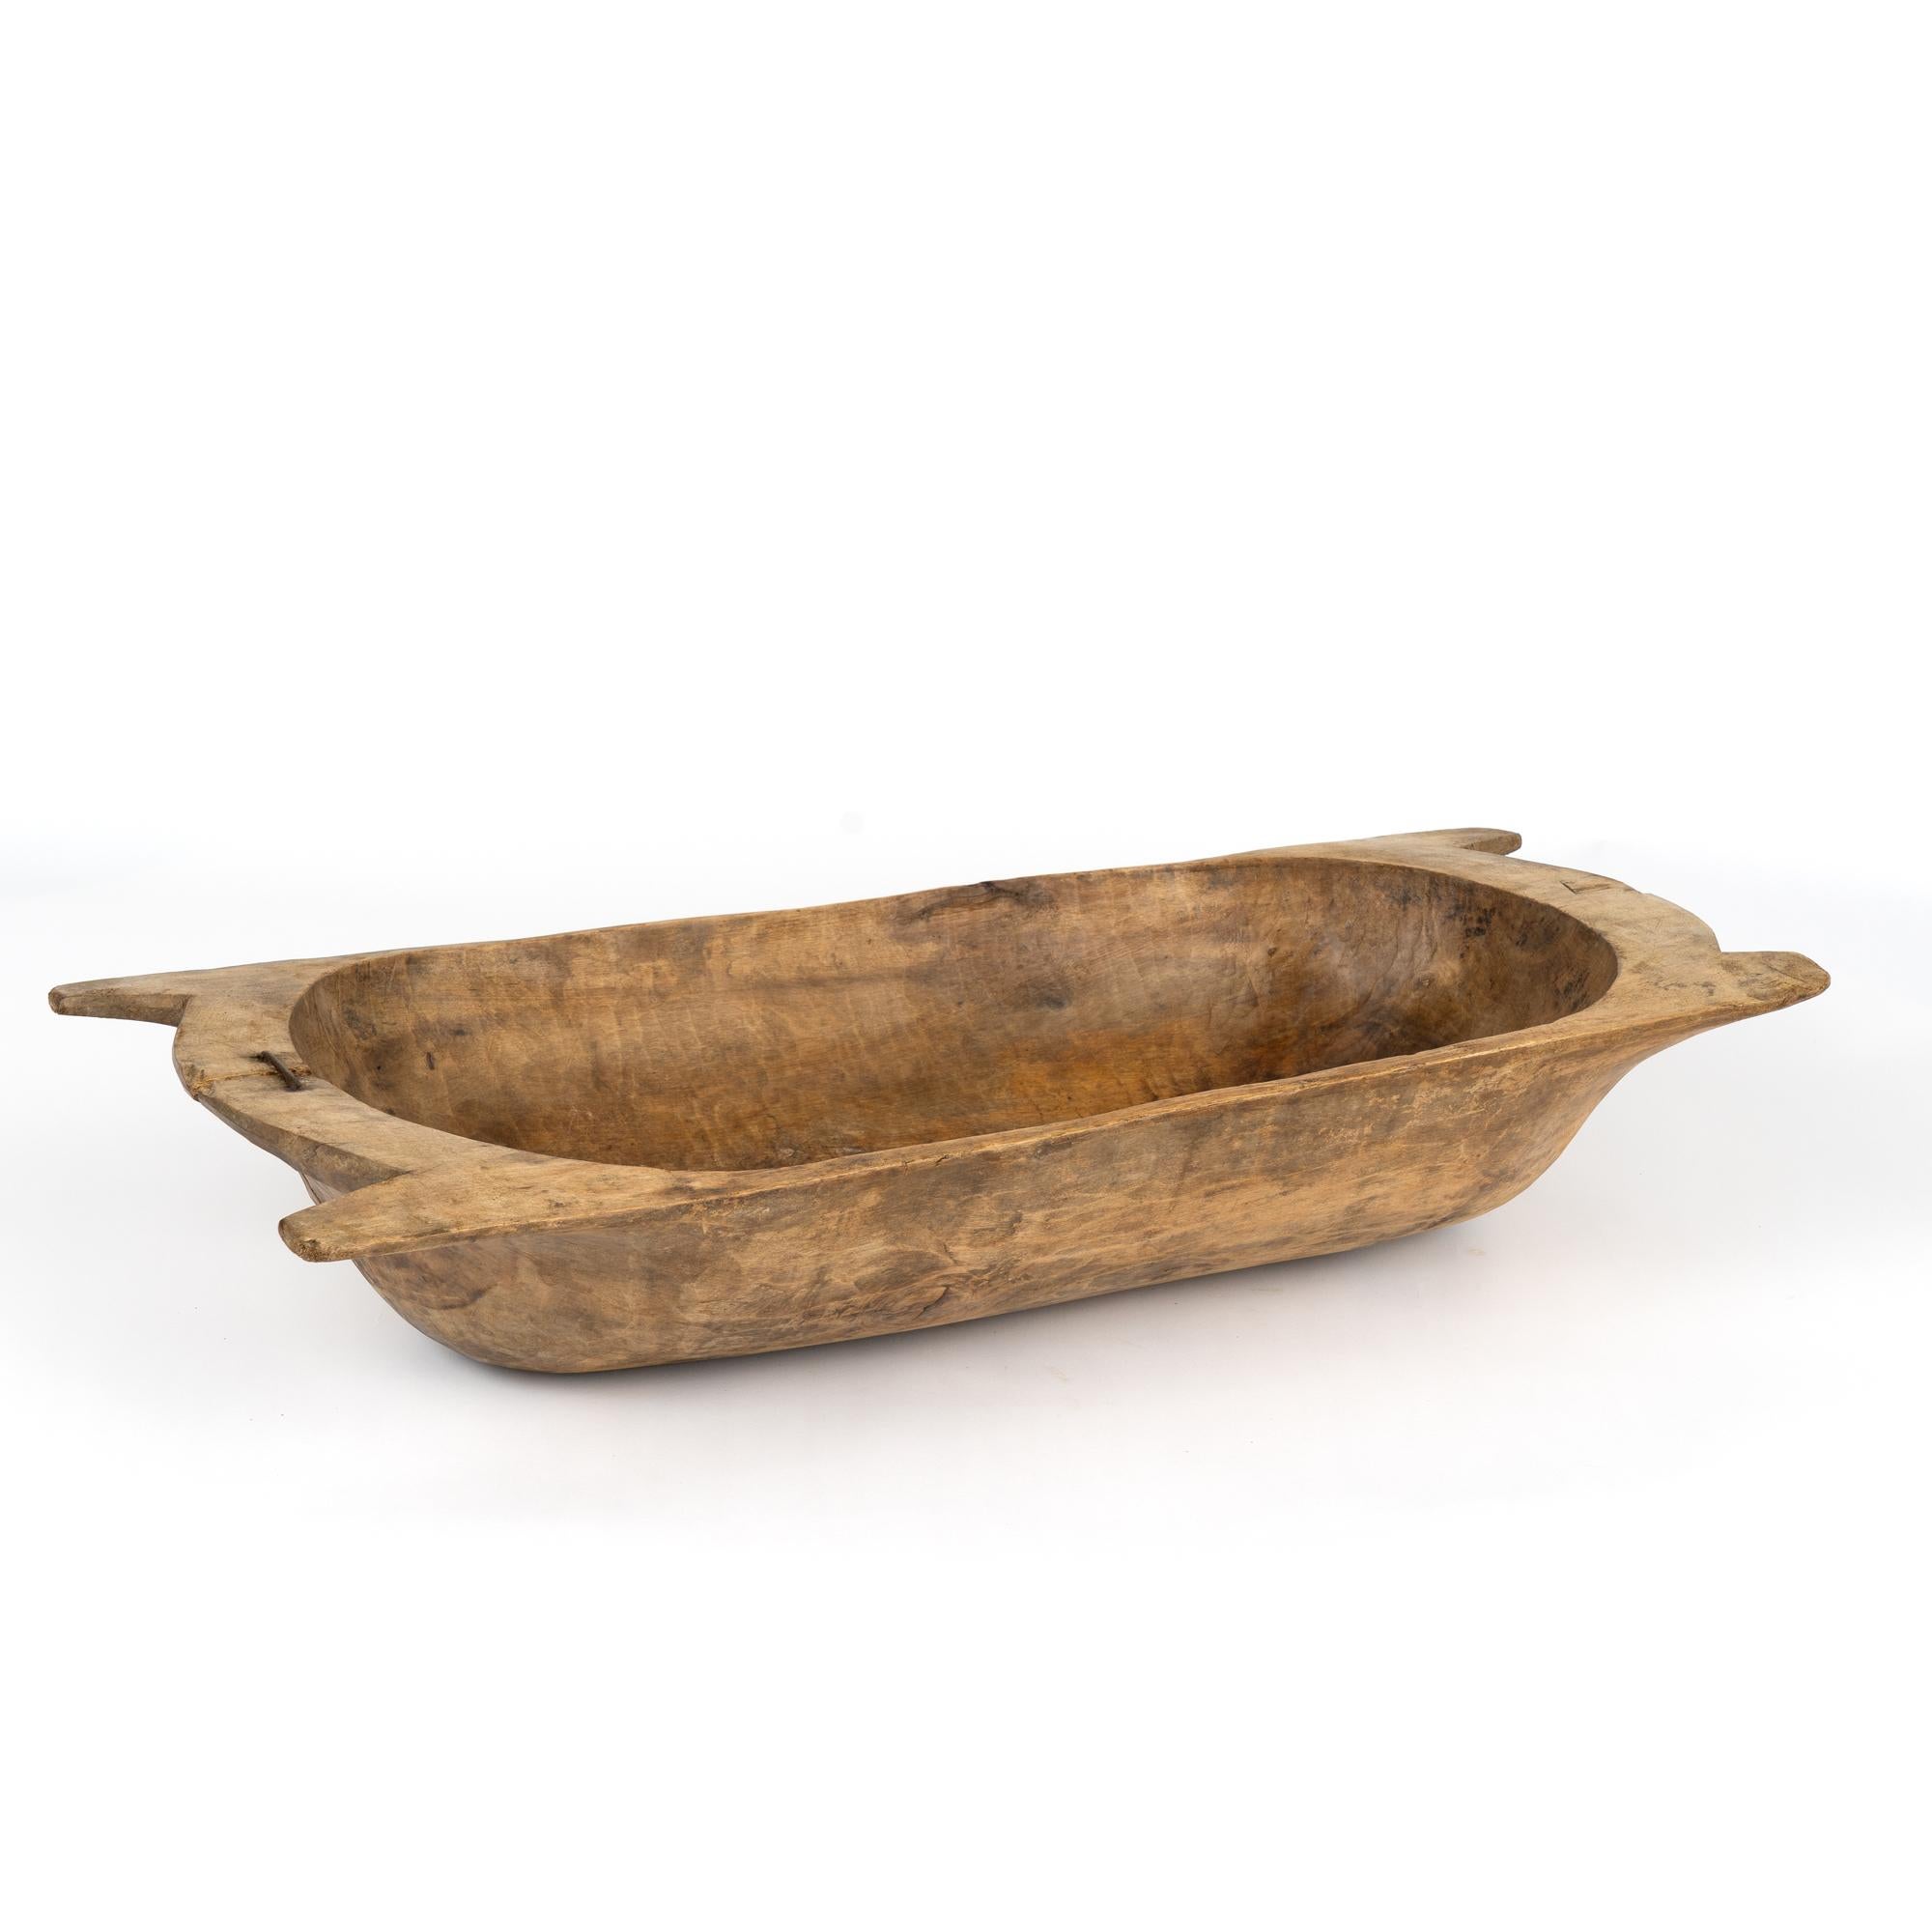 Antique, hand hewn, European country dough bowl / trencher featuring a rounded rectangular shape, tapered base and handles.
Old cracks, nicks, stains, distress are reflective of generations of use. Old repair using nail/large staple to secure